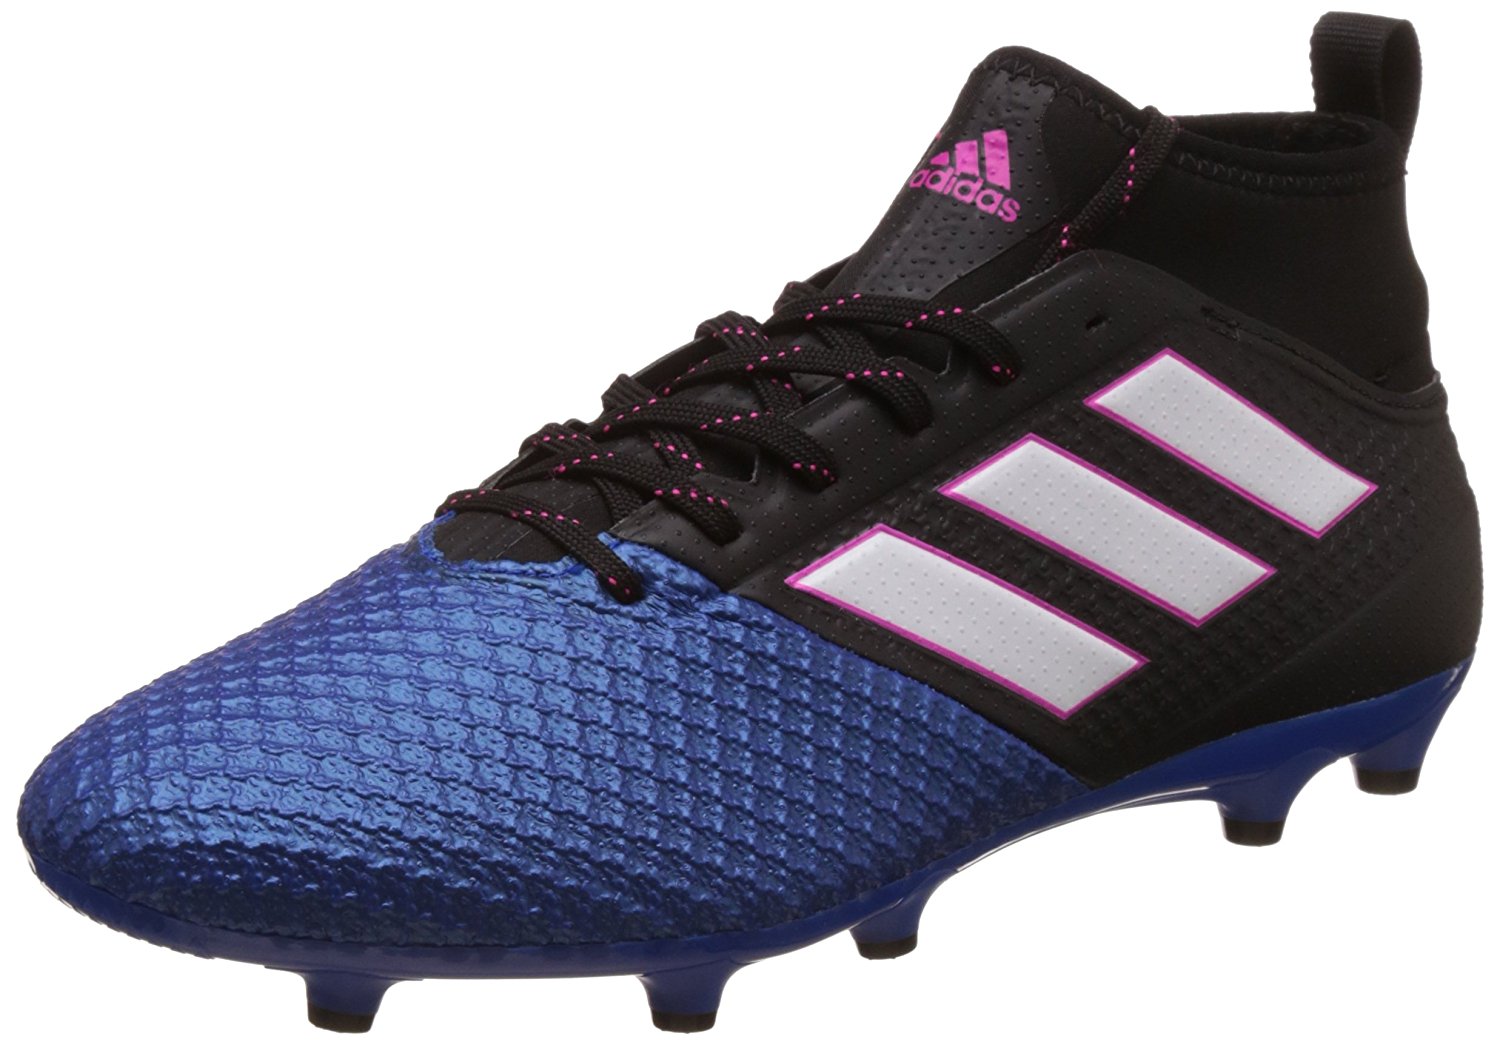 Best Football Boots 2020 - The Ultimate Guide - Greatest Reviews